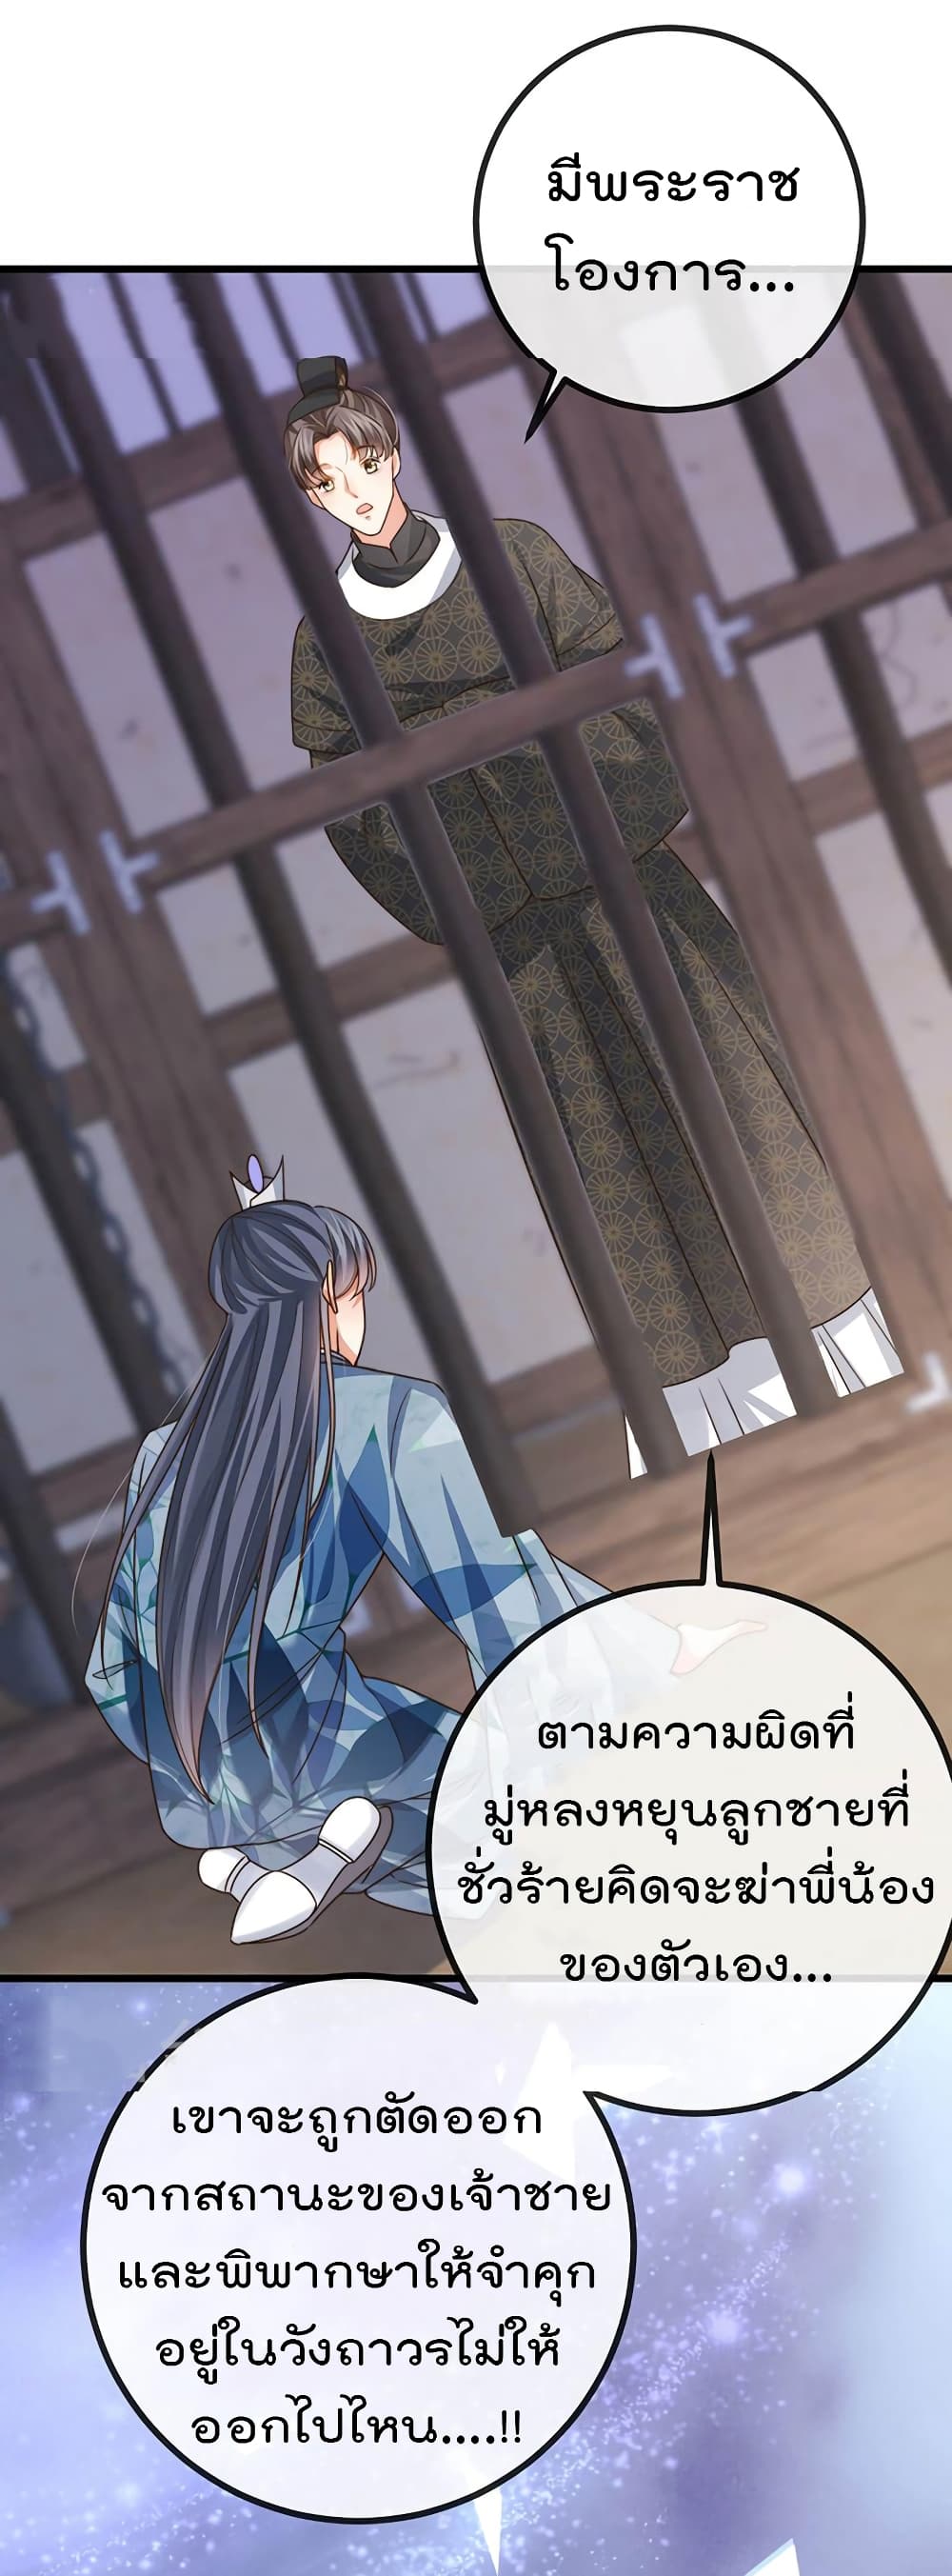 One Hundred Ways to Abuse Scum ตอนที่ 62 (17)